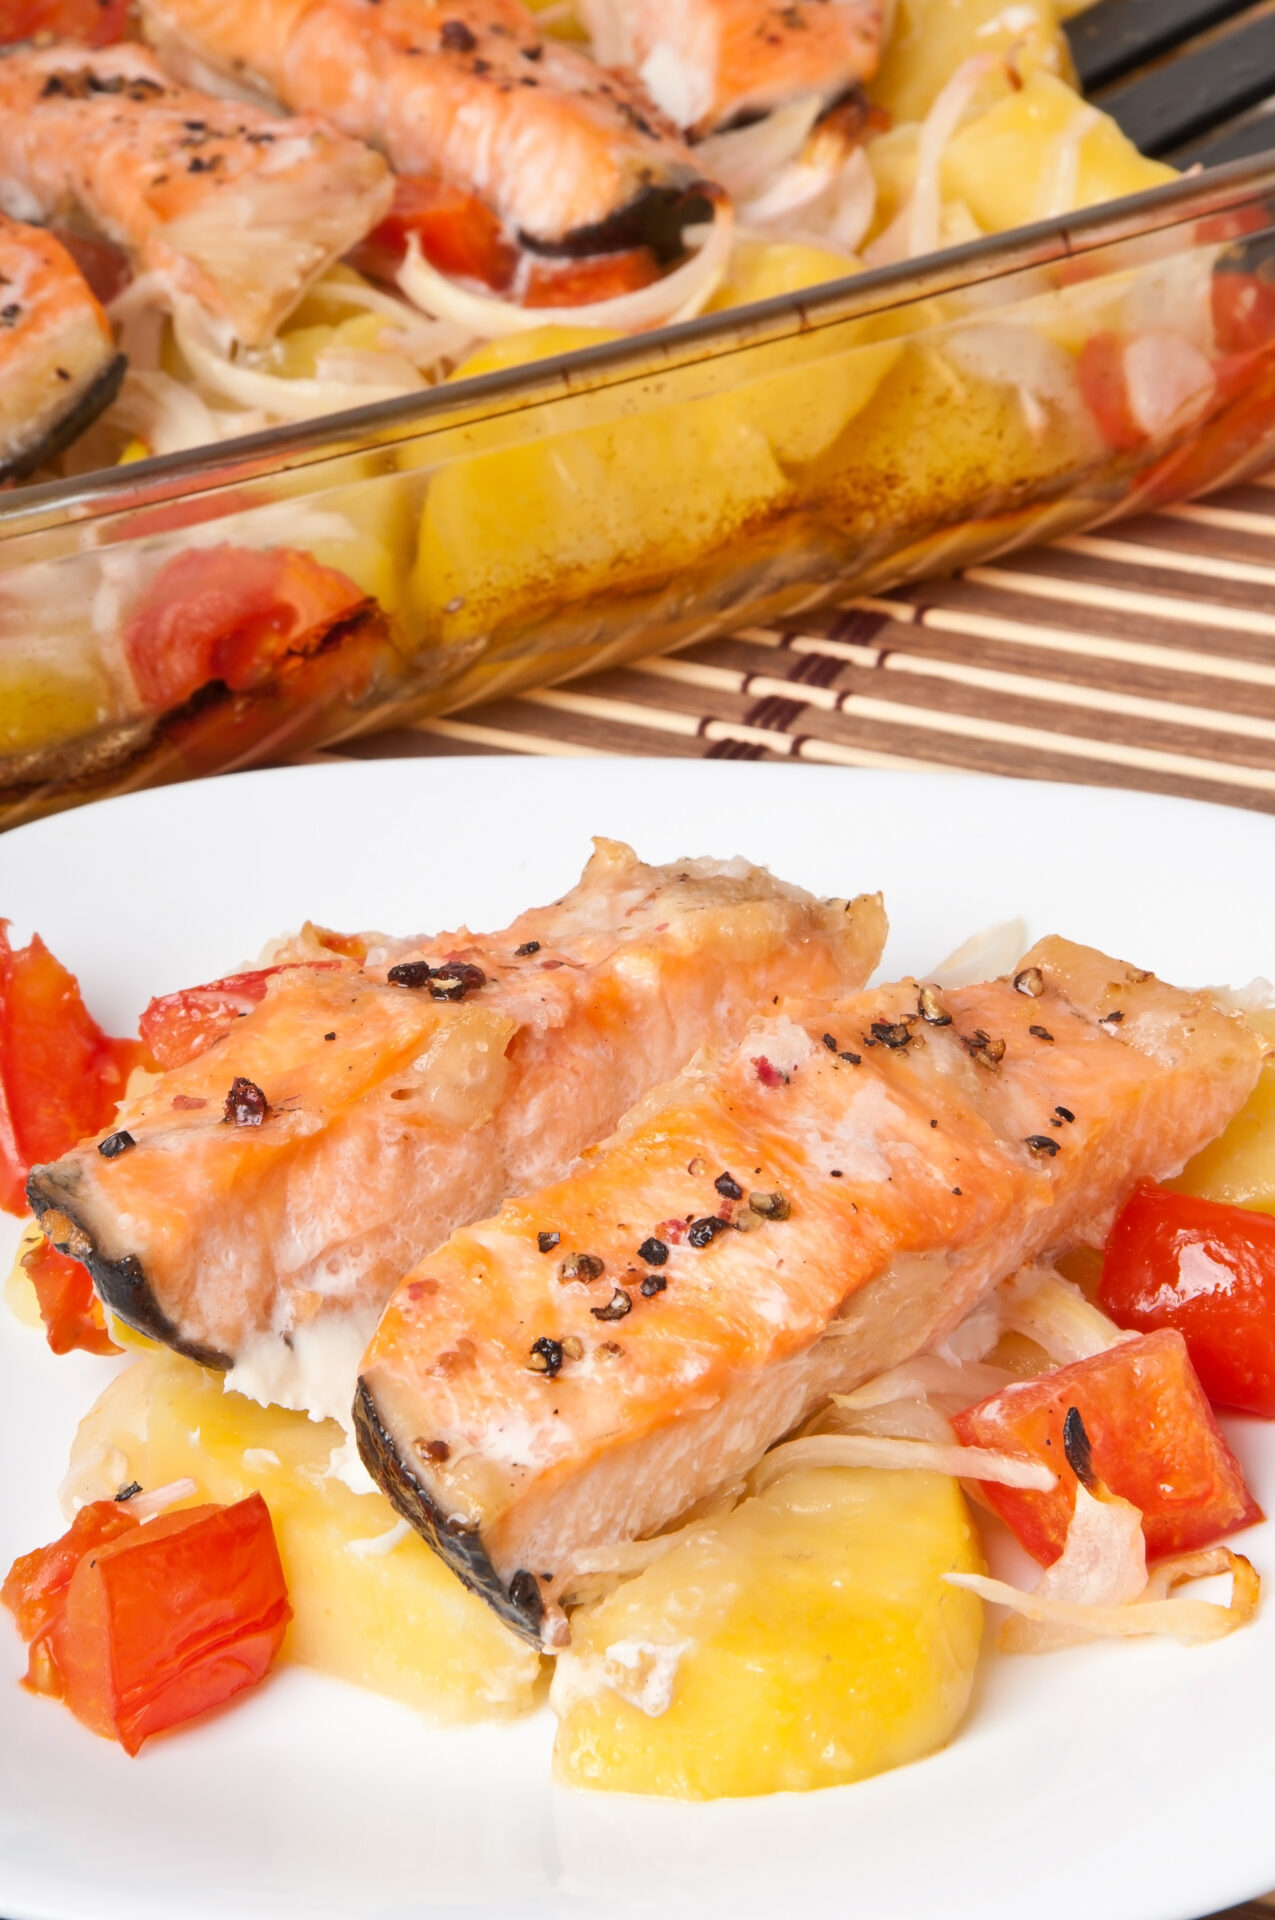 Pieces of salmon with potatoes, tomatoes and onions baked in the oven